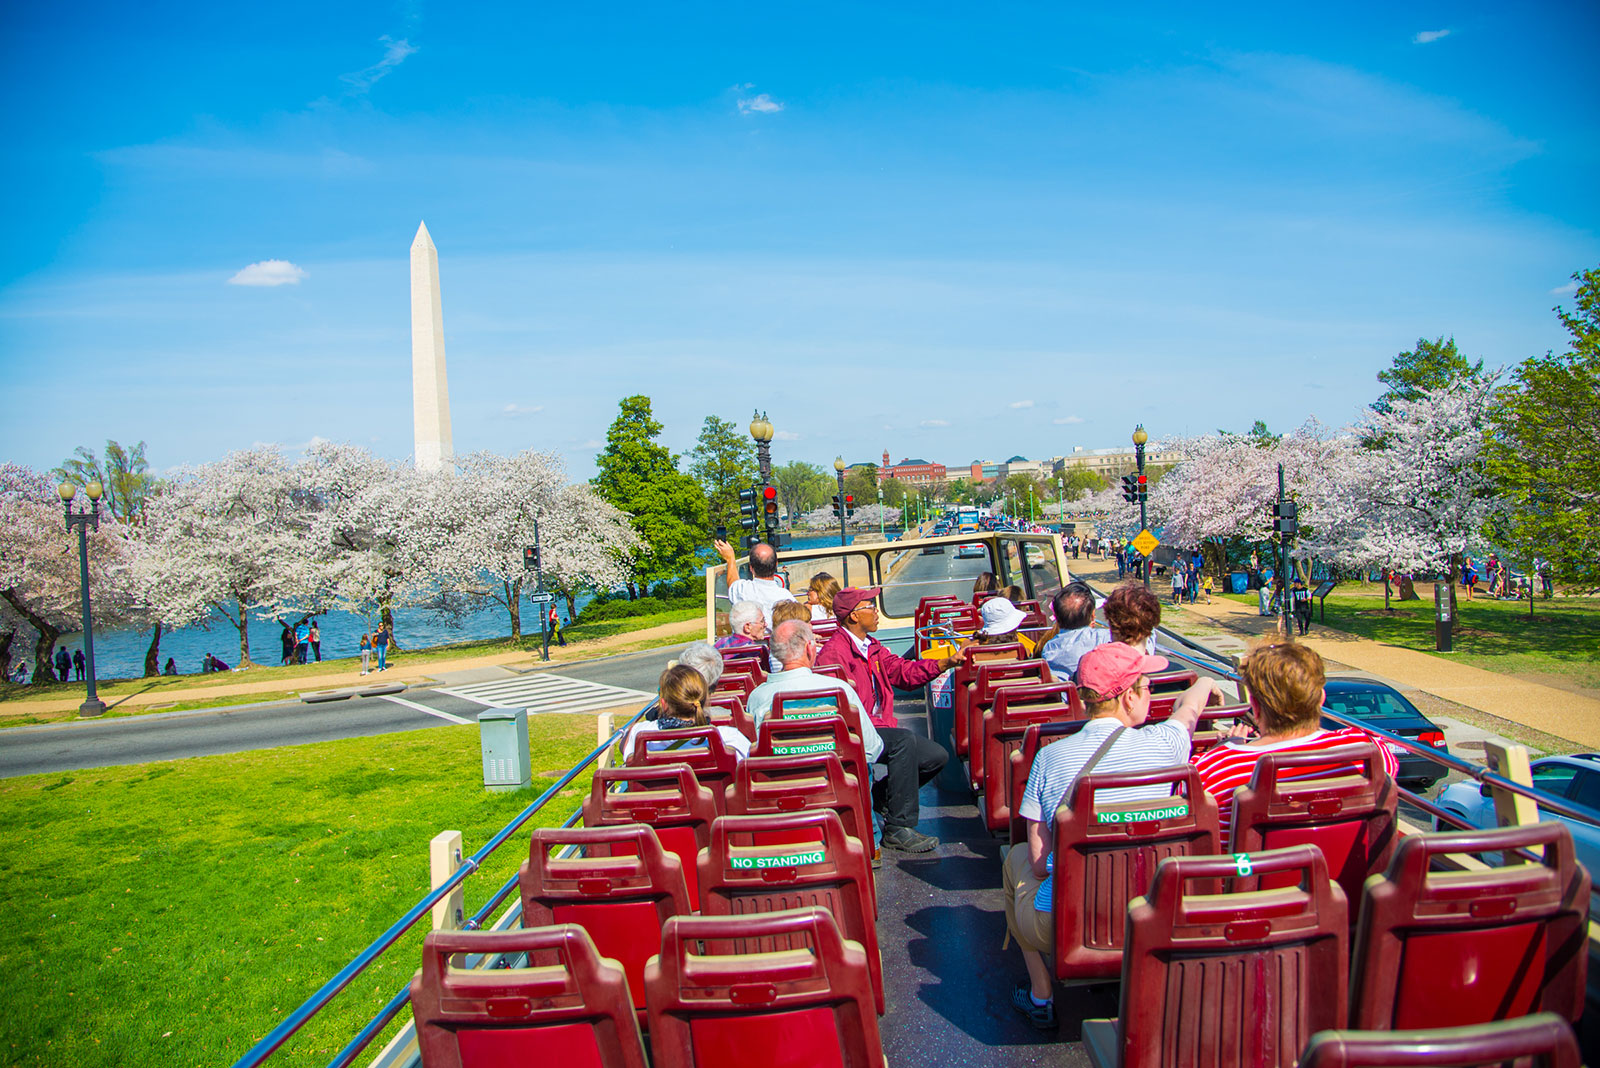 washington dc guided tour packages